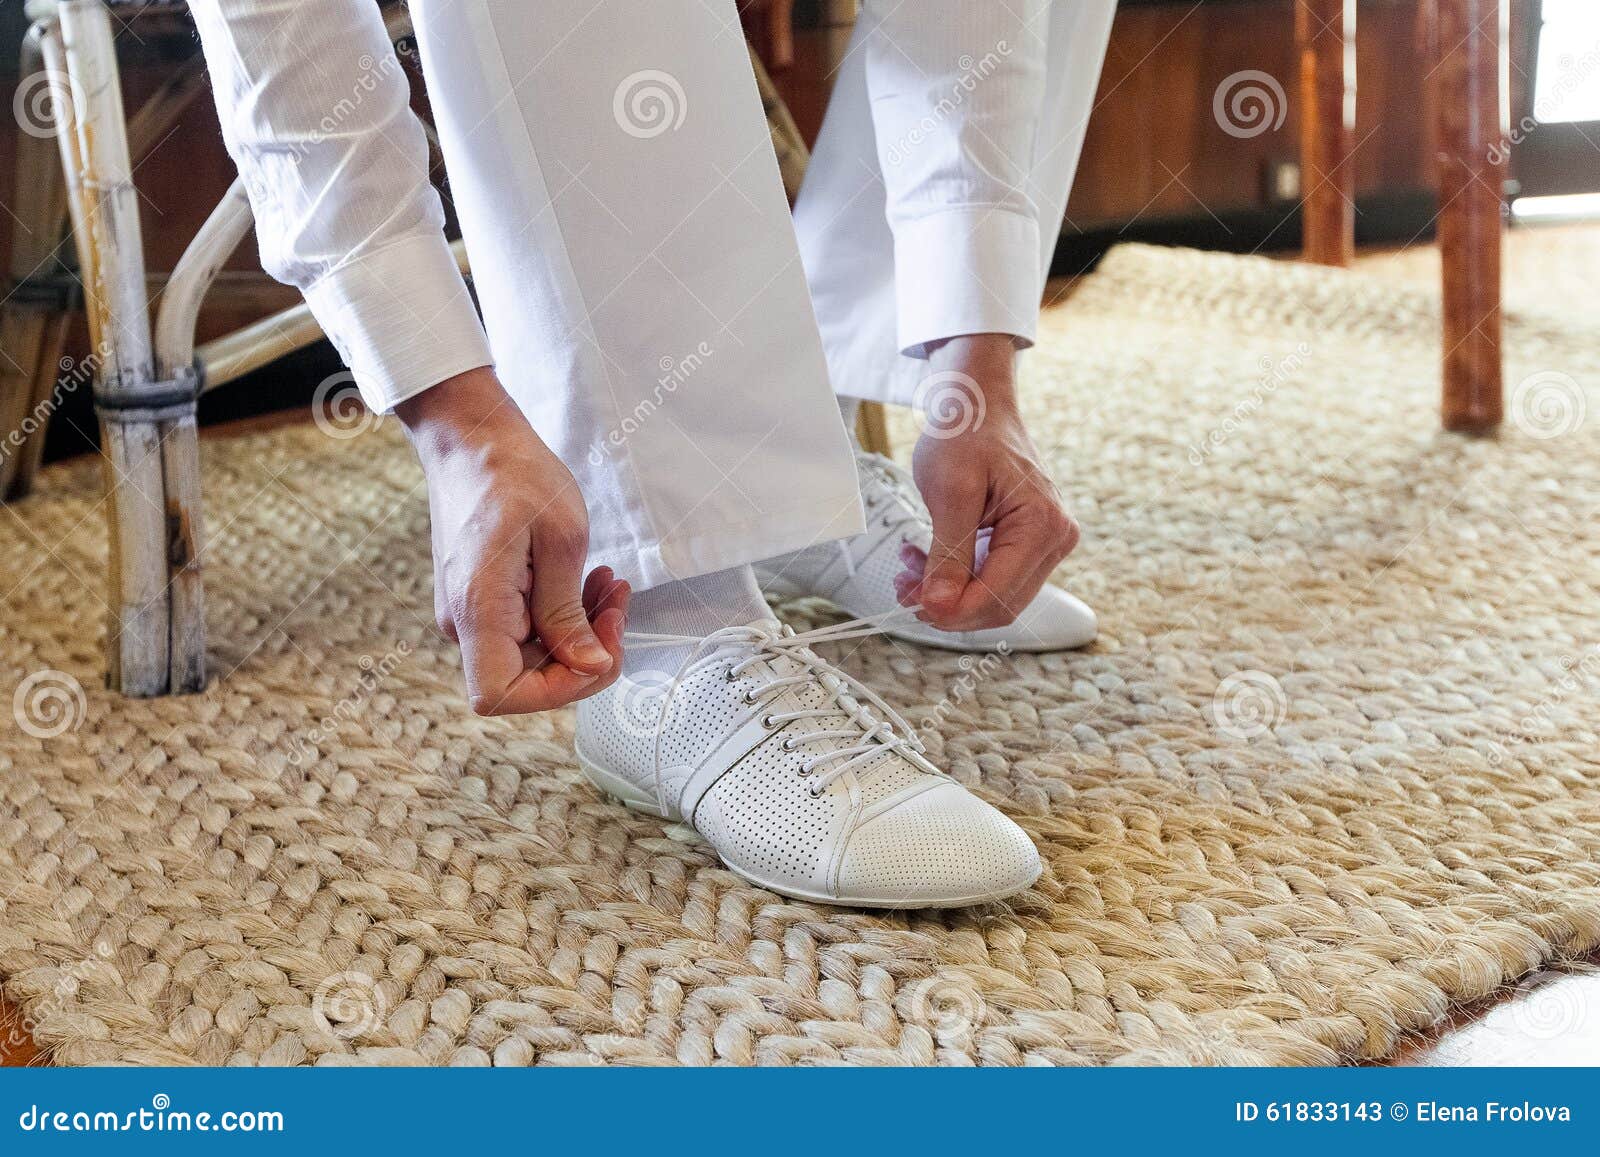 Groom Putting On White Shoes For The Beach Wedding On A